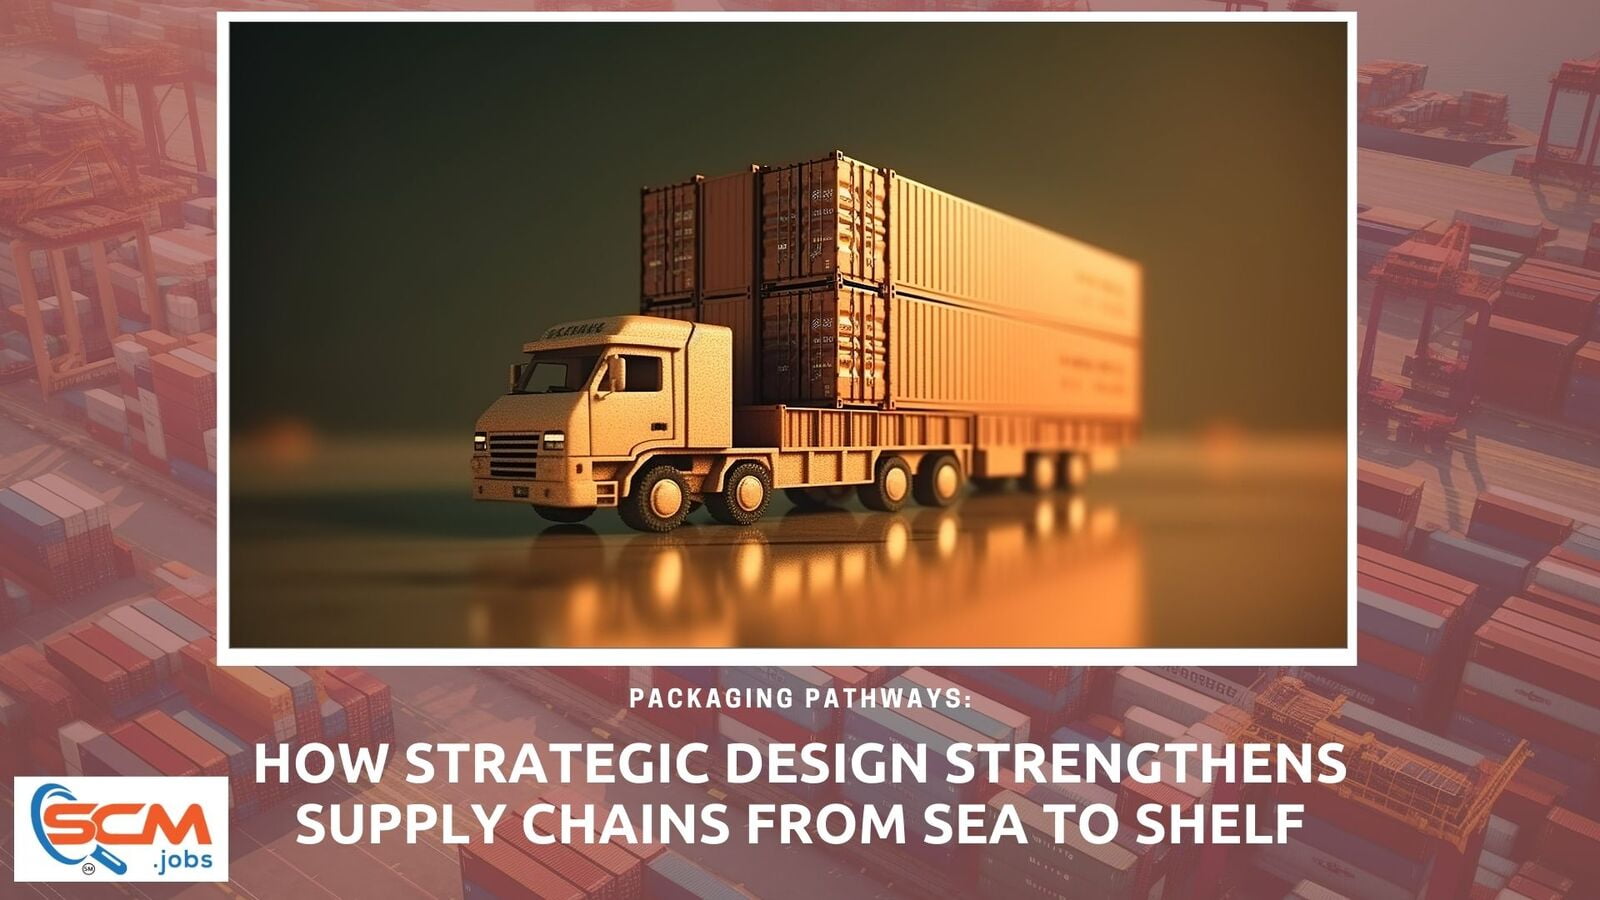 Packaging Pathways: How Strategic Design Strengthens Supply Chains from Sea to Shelf